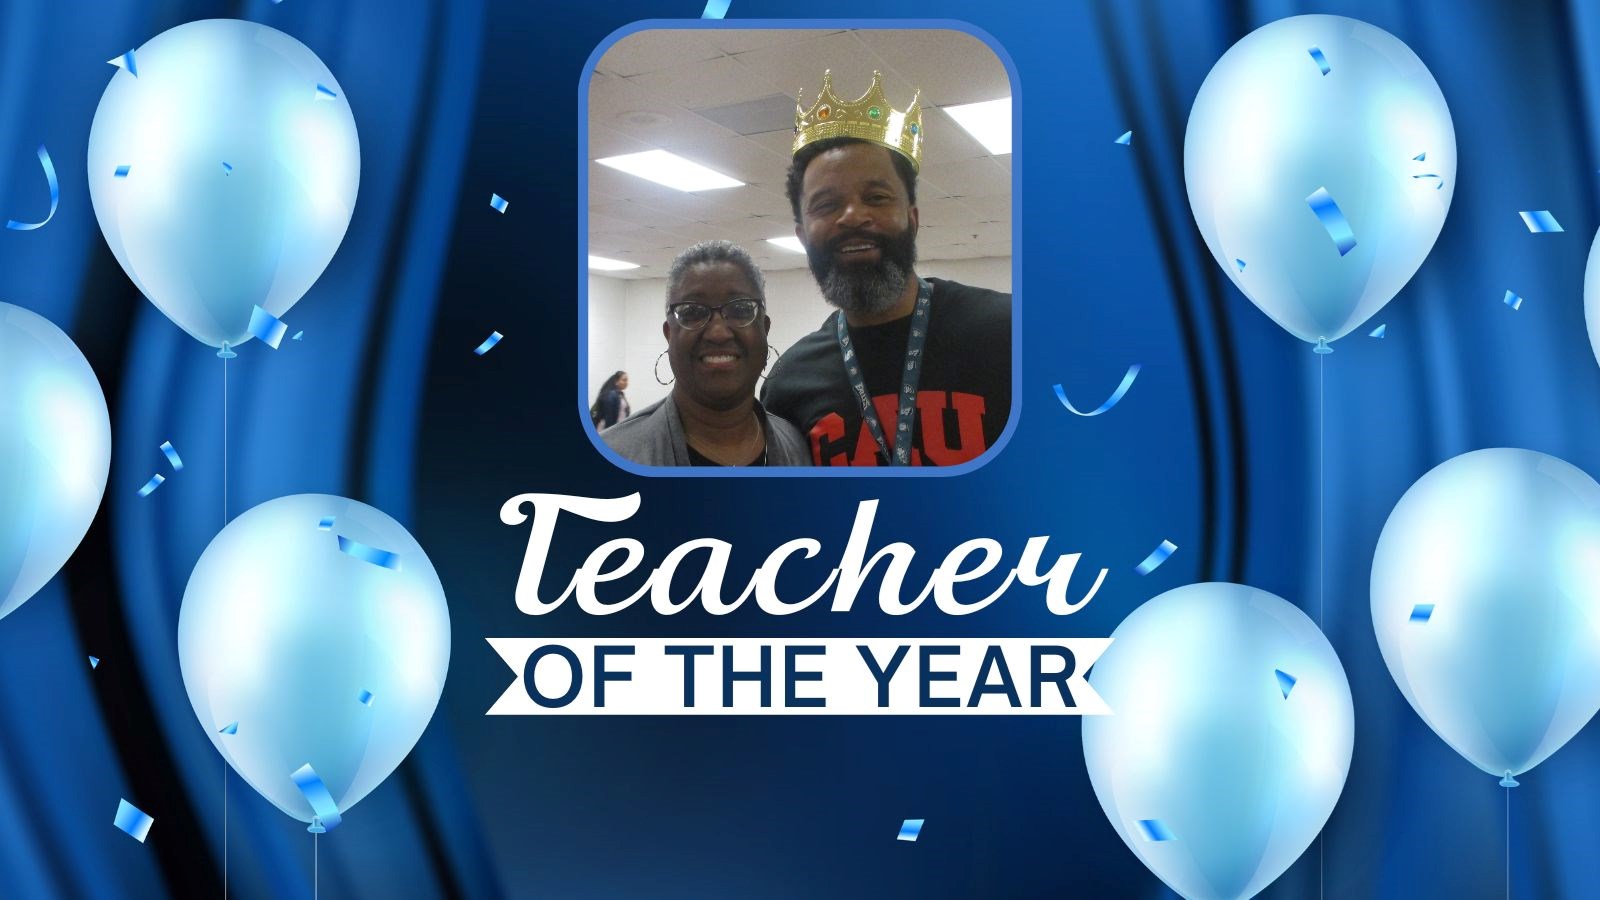 Opened blue curtains with blue ballons and confetti.  Text reads "Teacher of the Year". Framed picture of Mr. Evans and his wife.